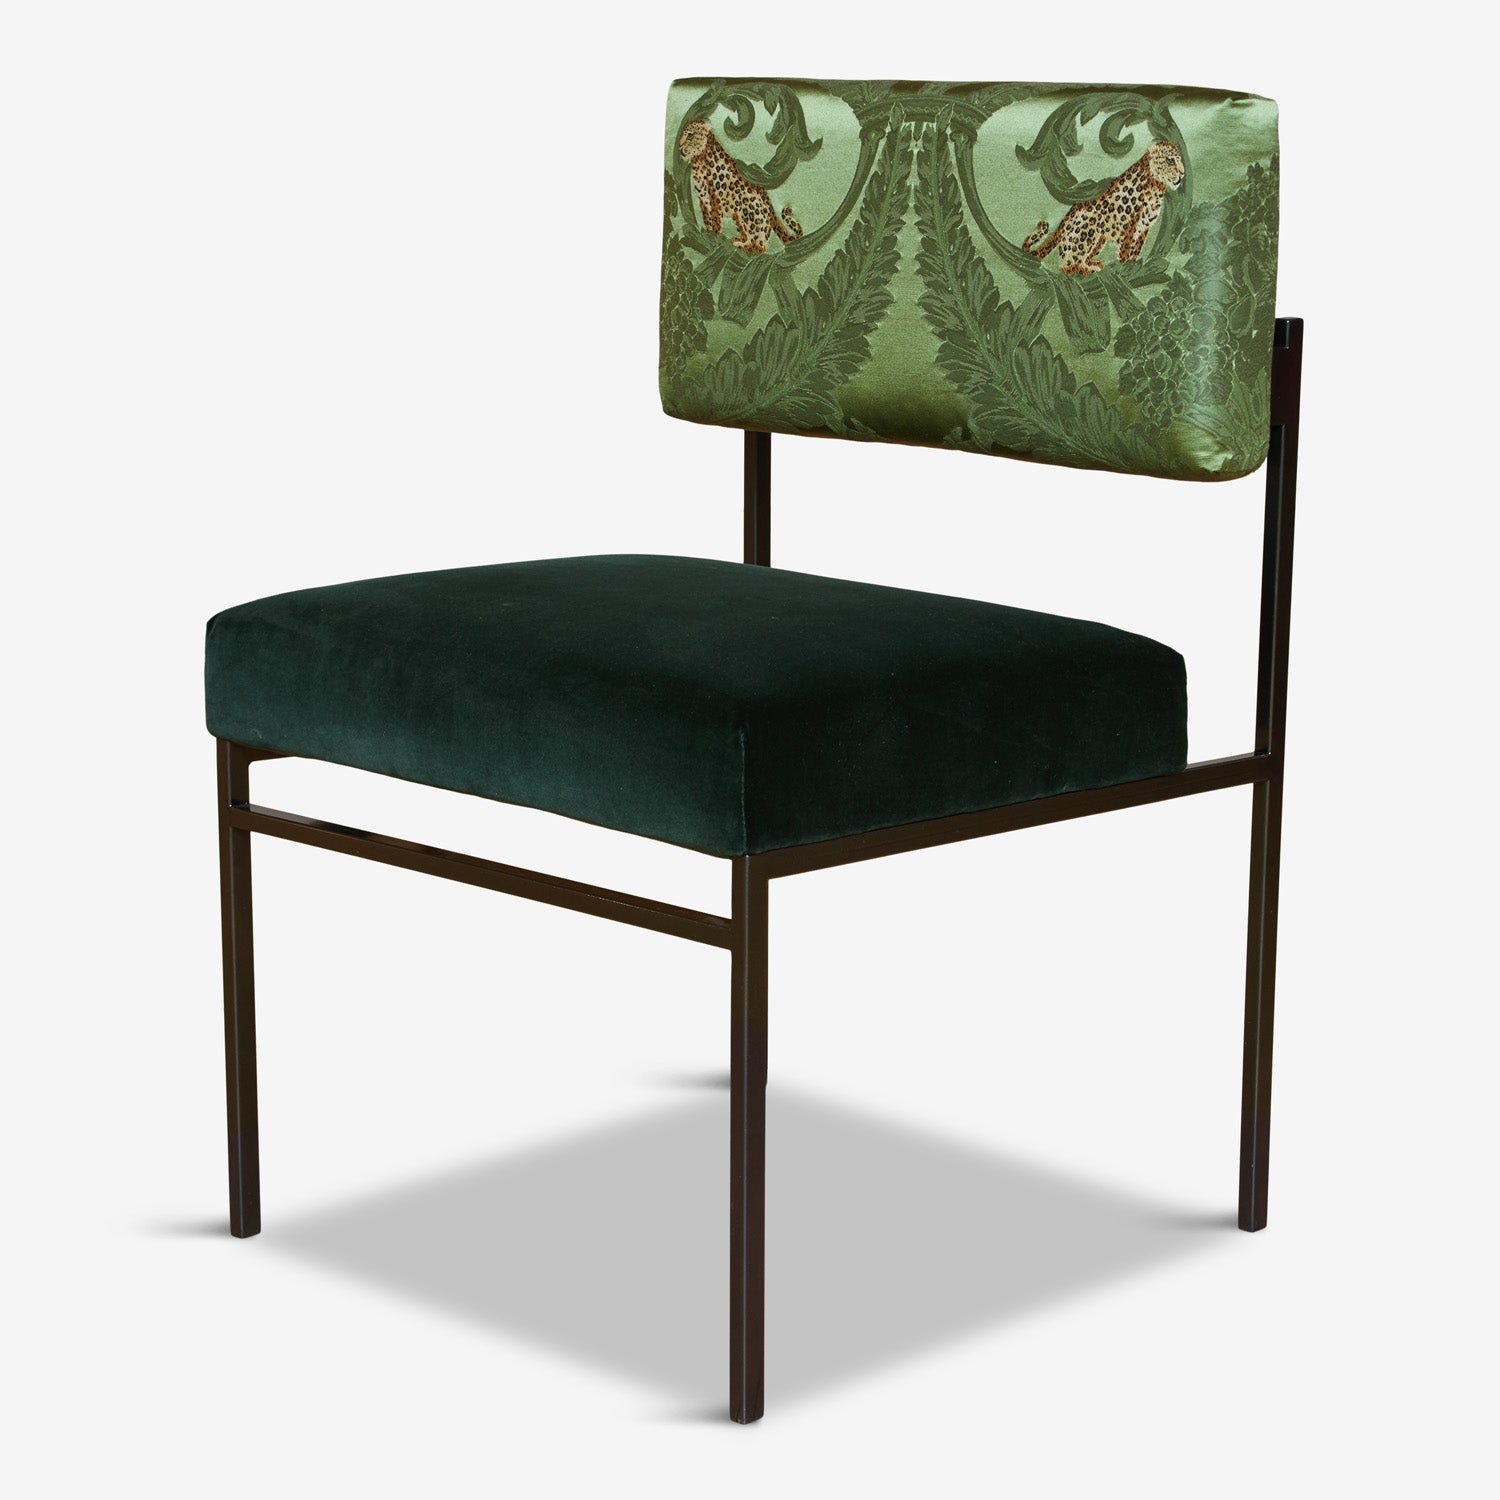 Glamorous patterned upholstery on sustainable dining chair